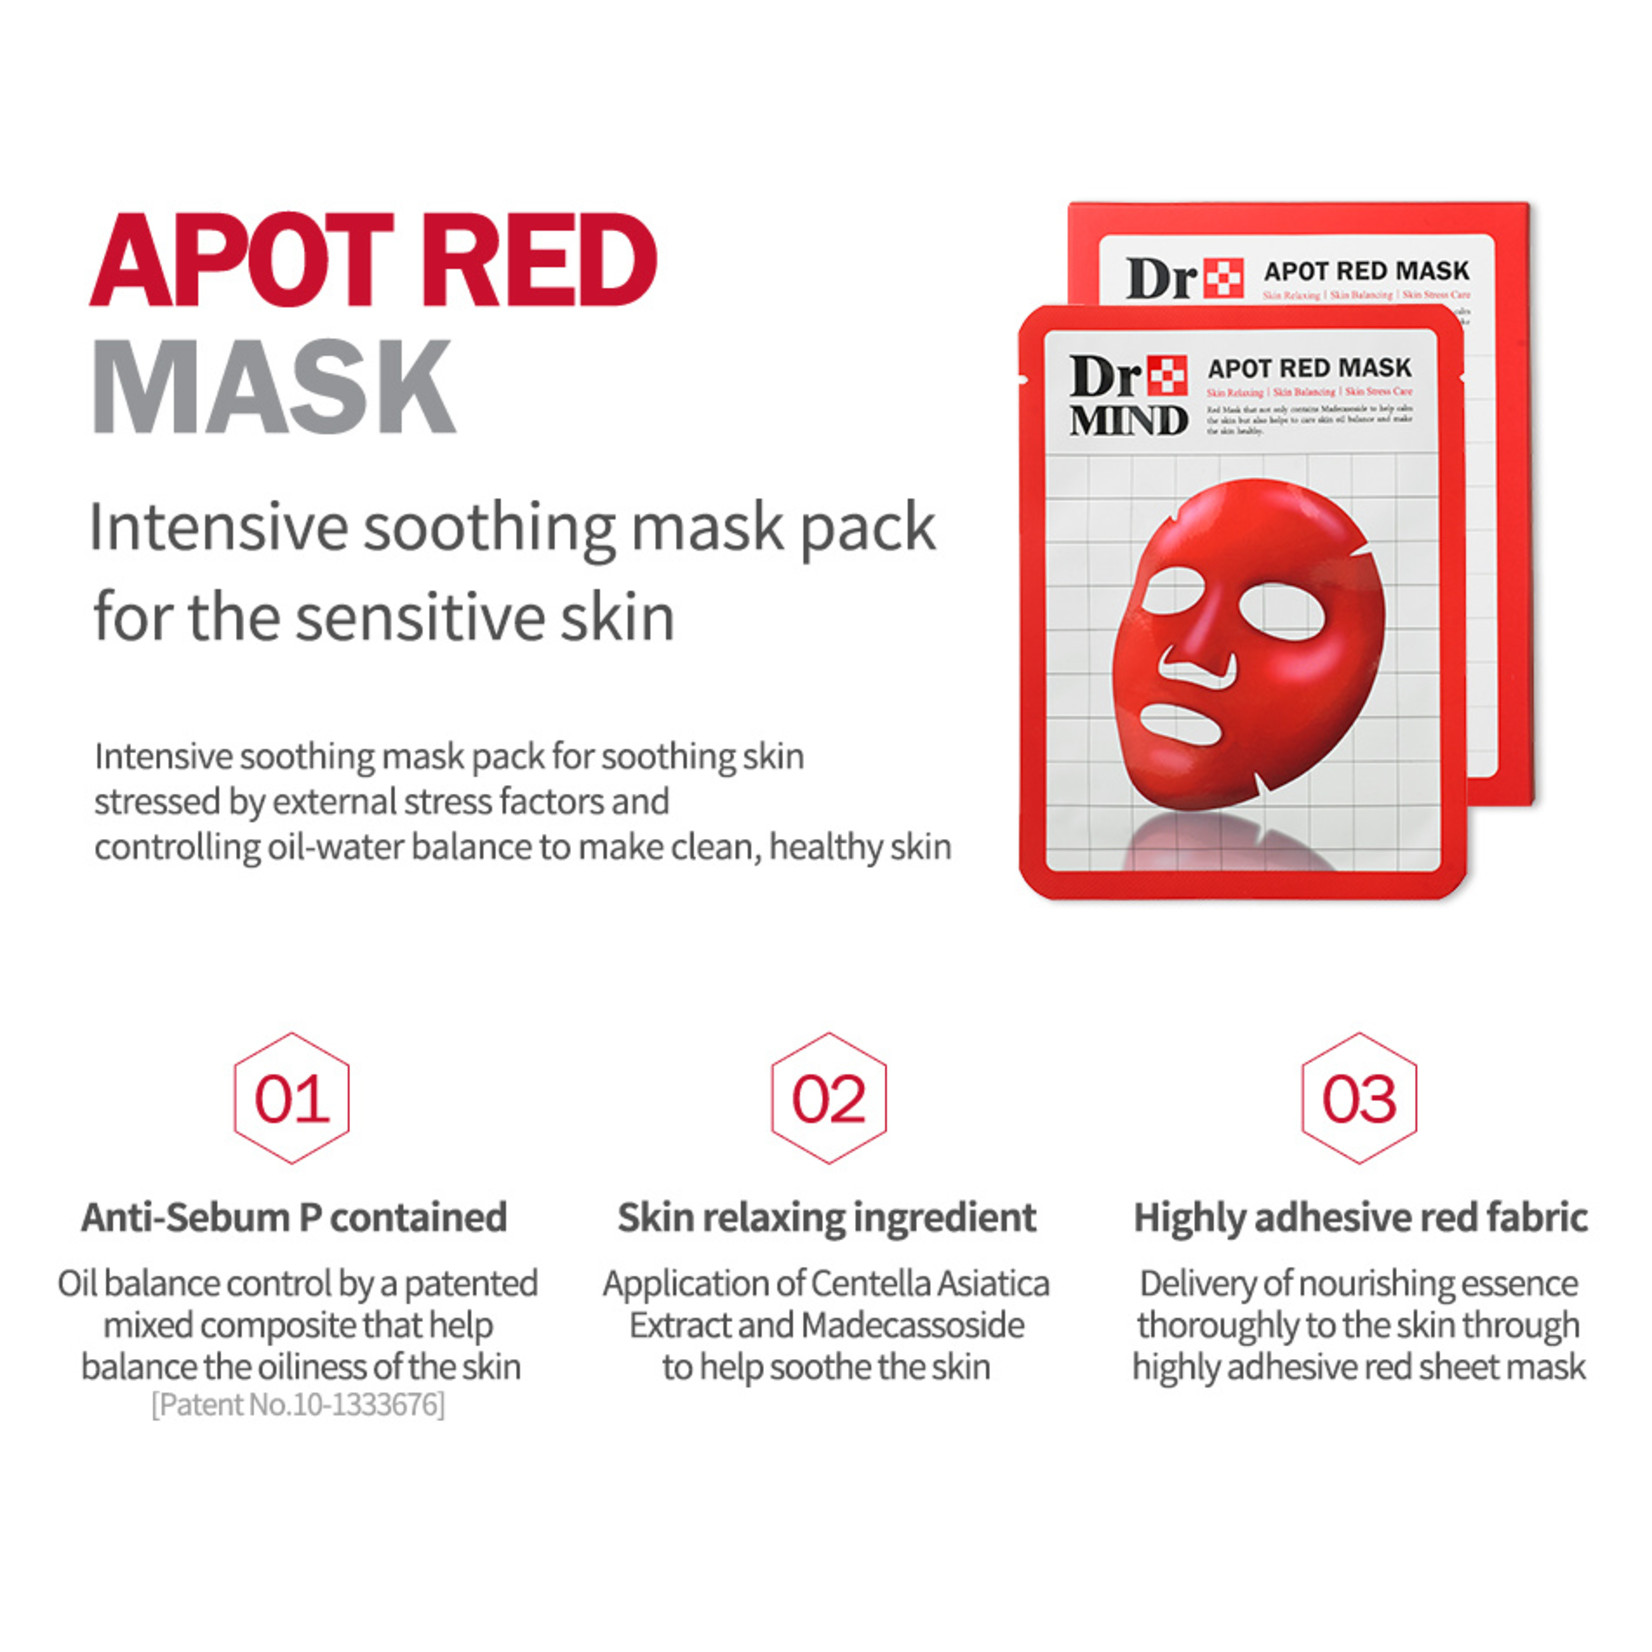 Dr.MIND APOT Red Mask